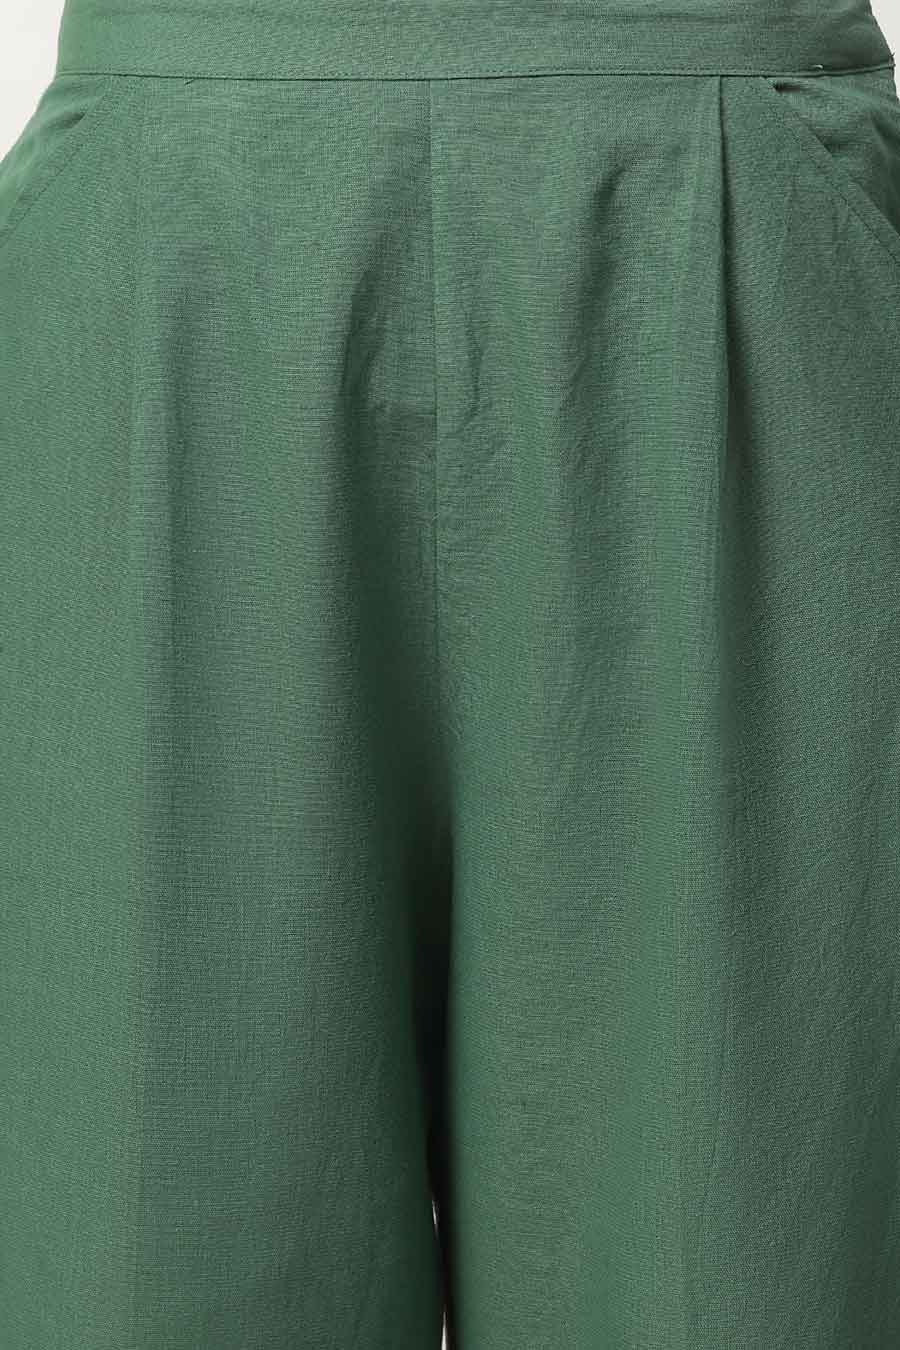 Fannie Green Straight Fit Pants